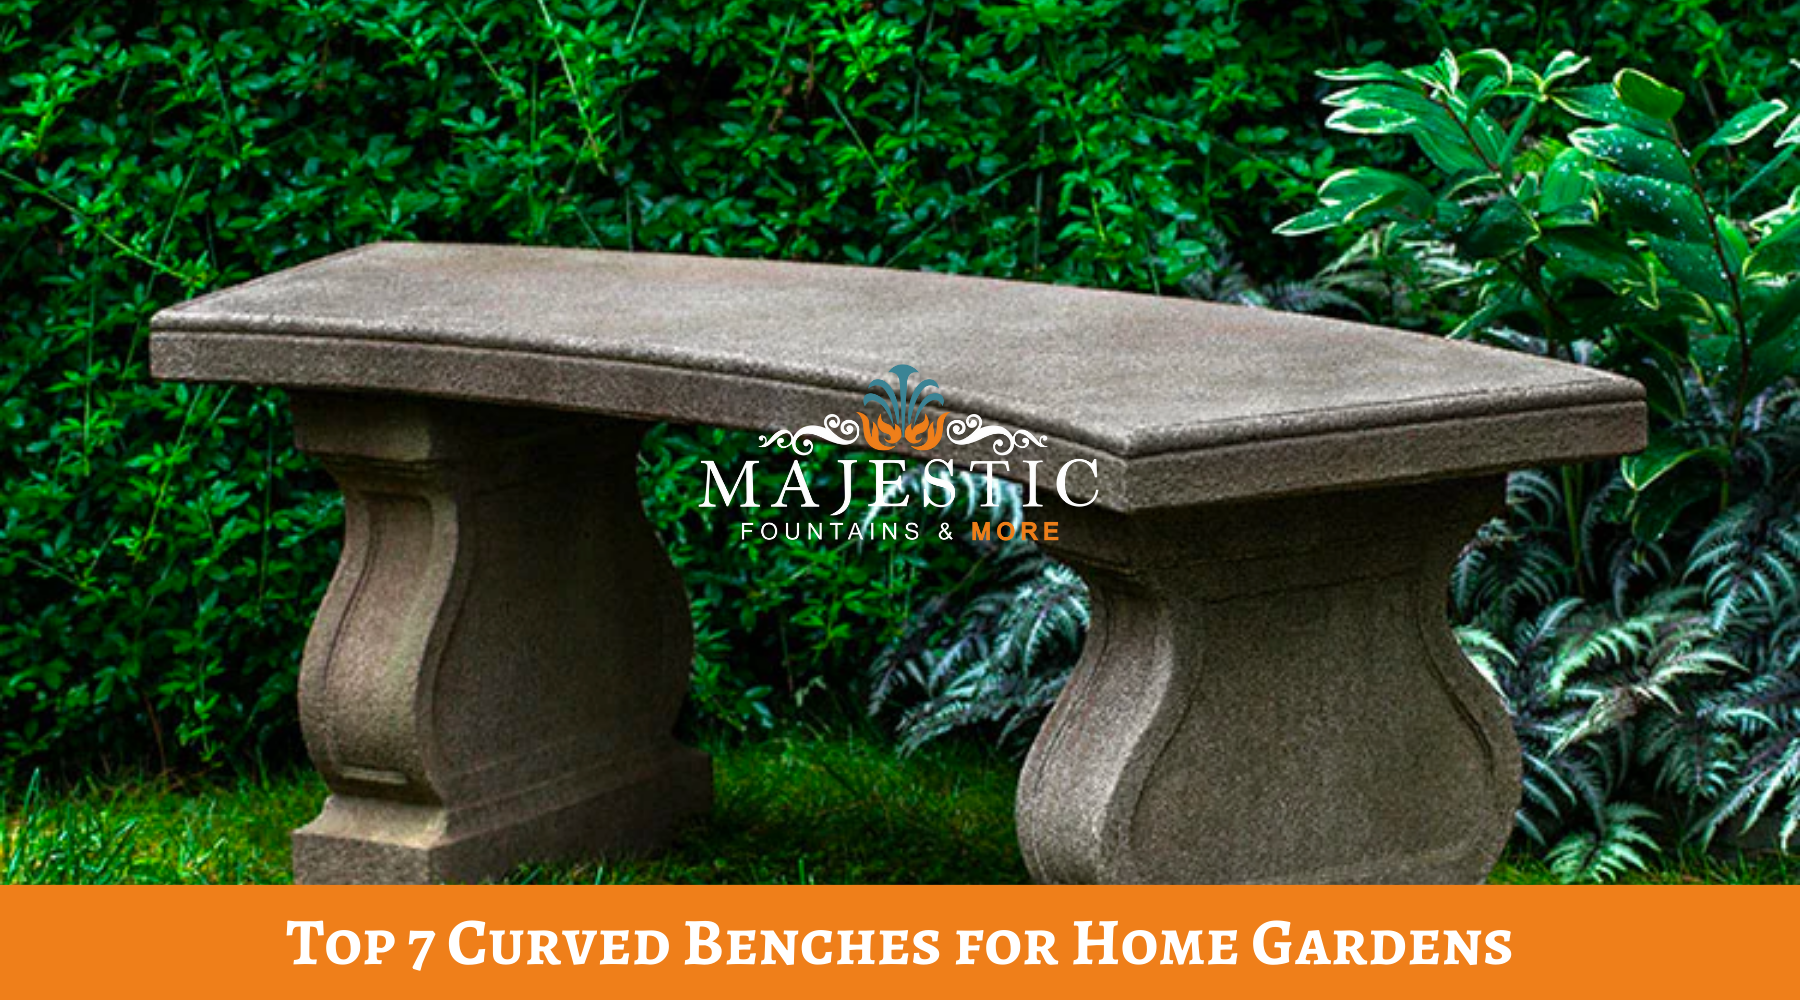 Top 7 Curved Benches for Home Gardens